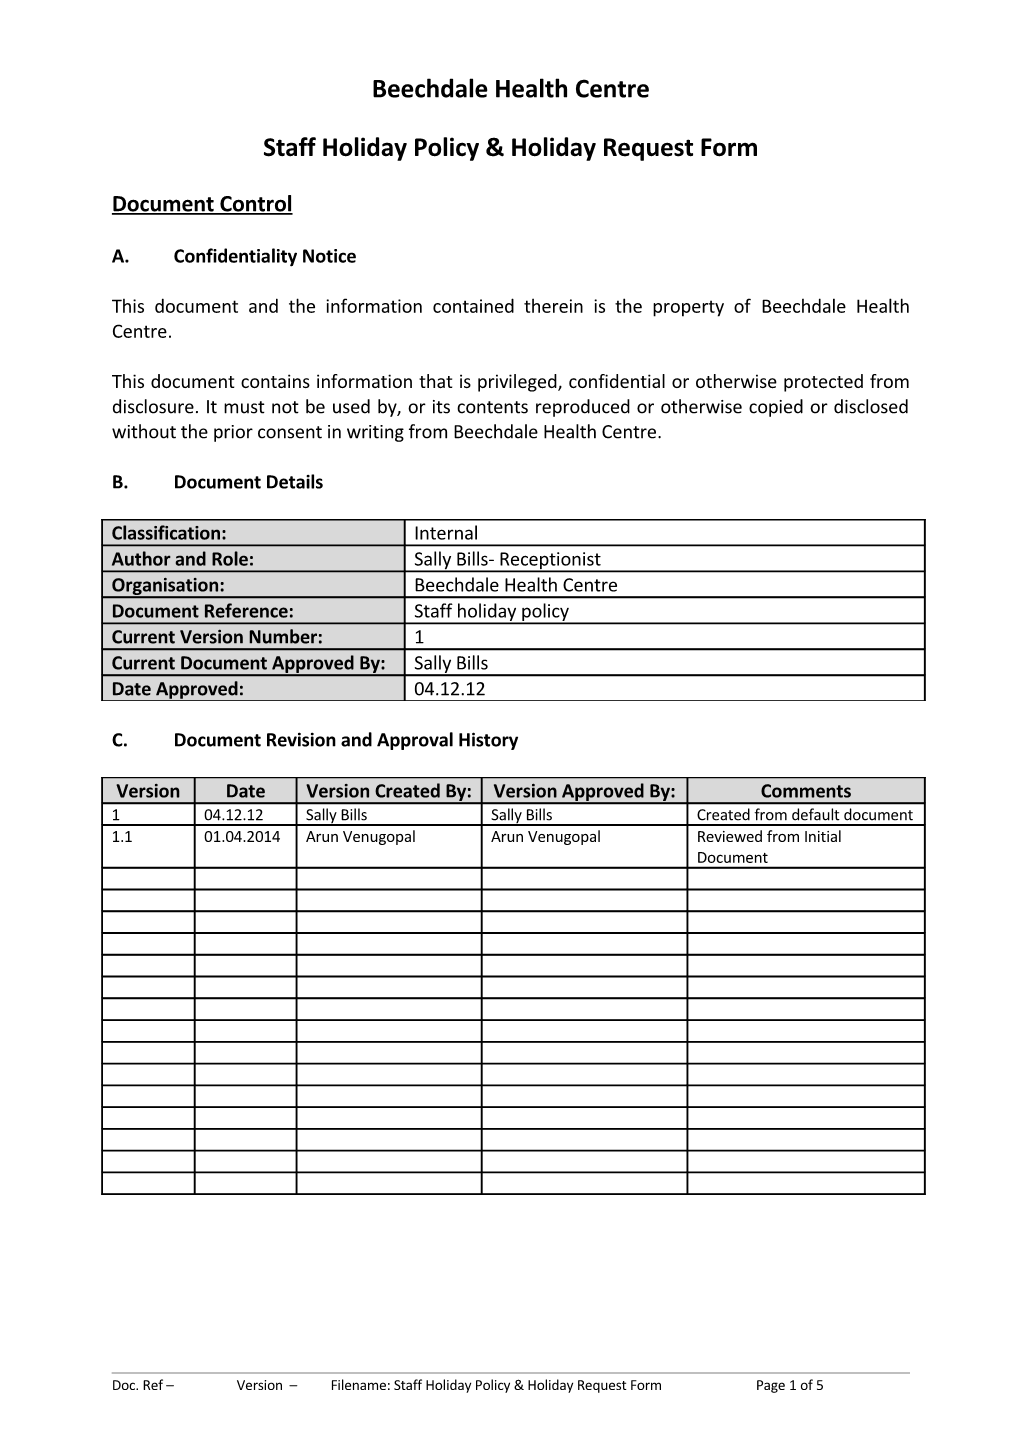 Staff Holiday Policy & Holiday Request Form